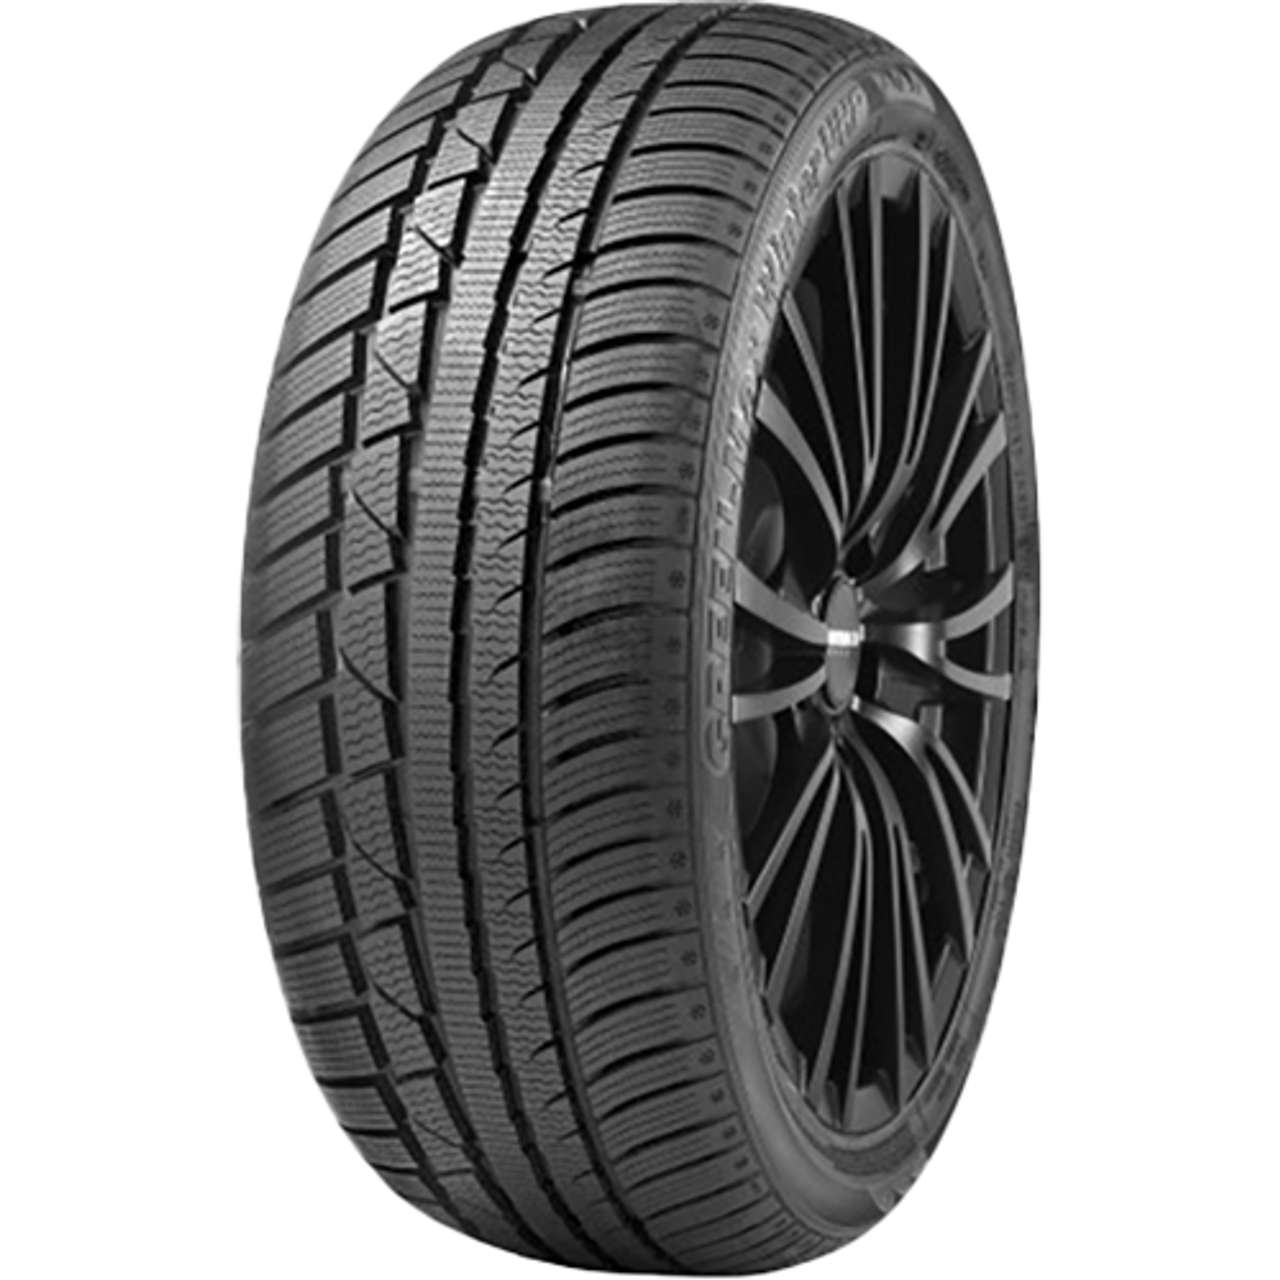 LINGLONG GREEN-MAX WINTER UHP 245/45R19 102V MFS BSW XL